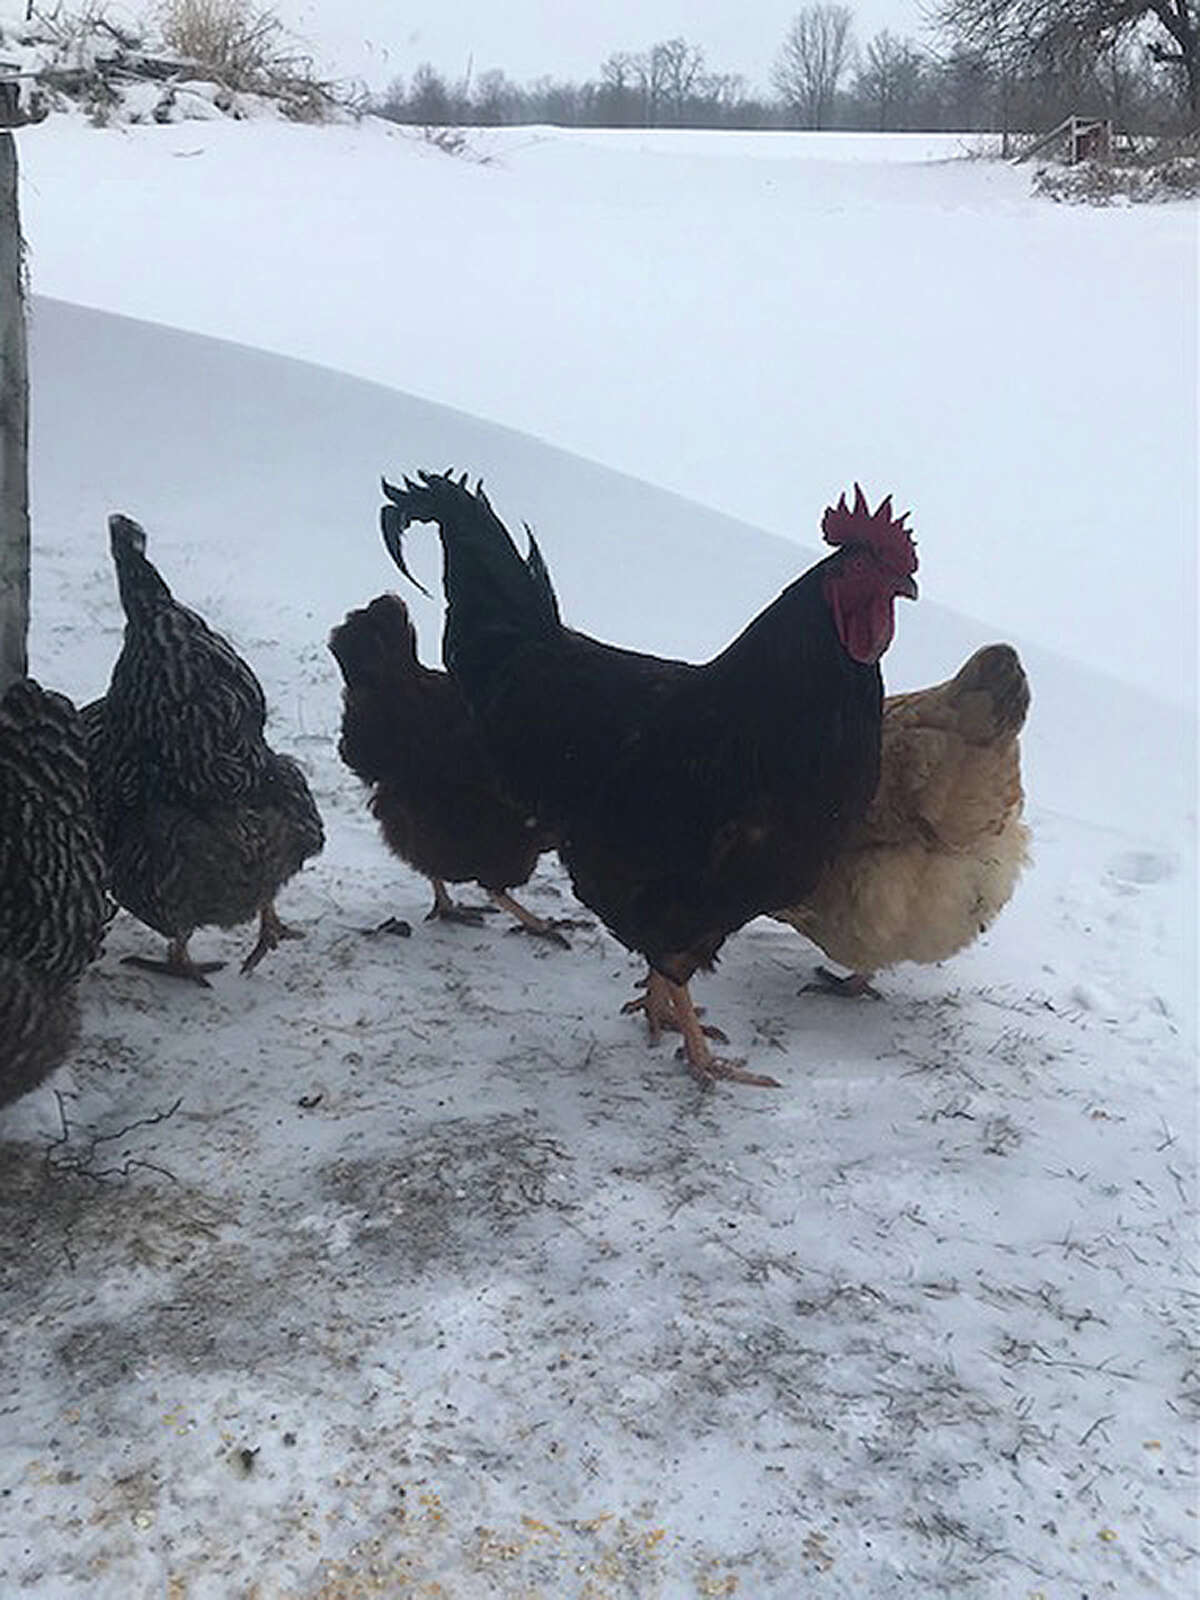 A flock of roosters and hens seems less than impressed by the snow and ice complicating their stroll.